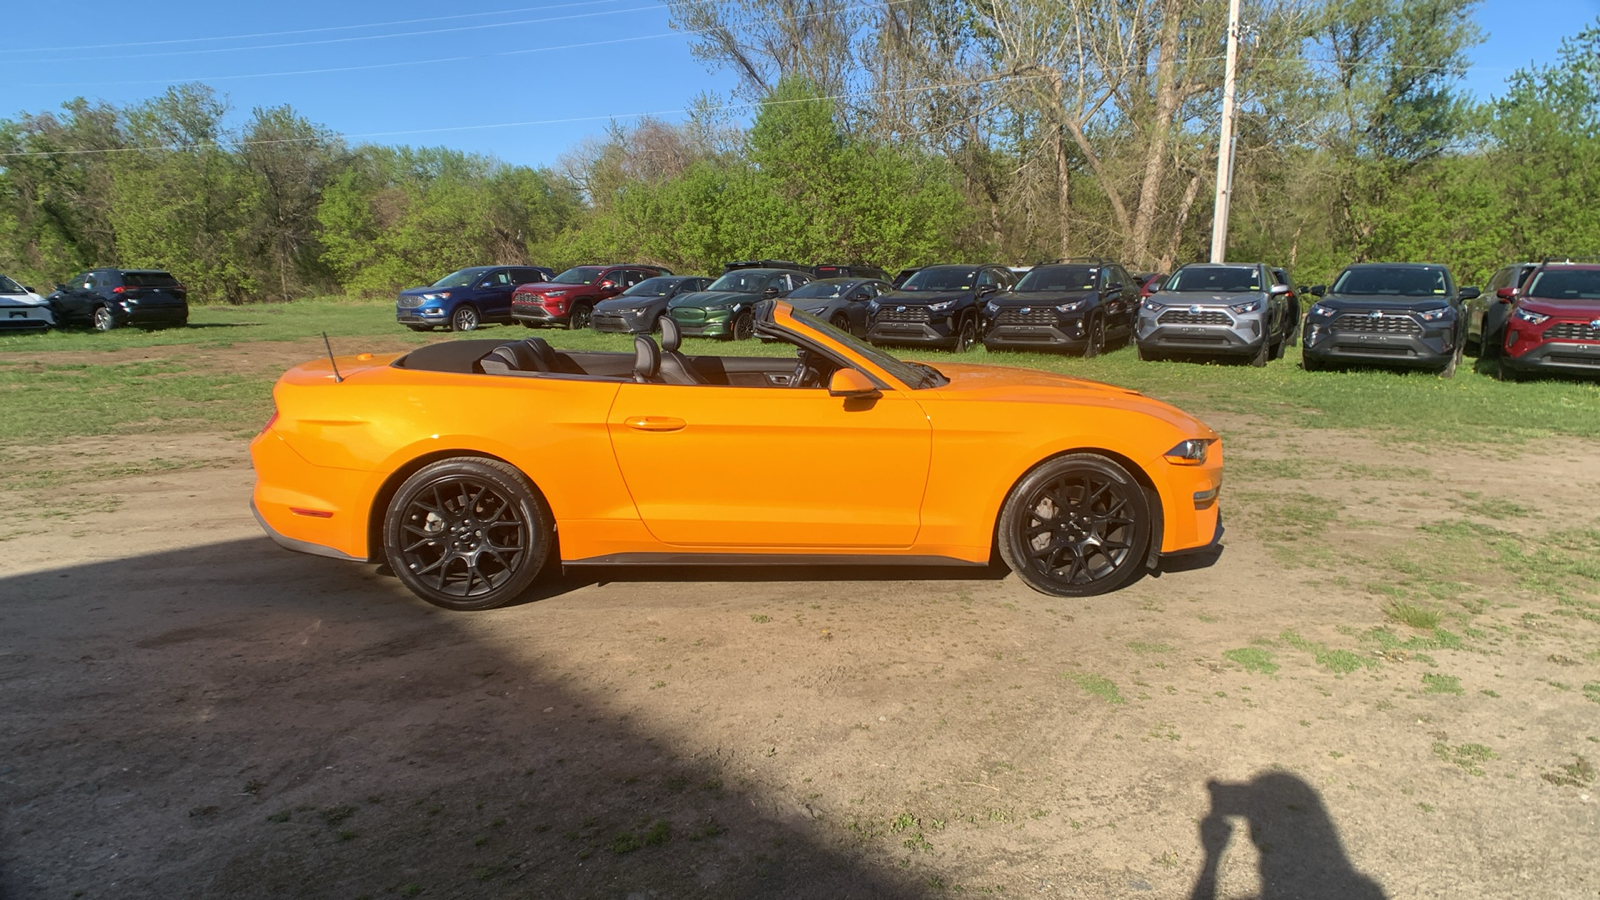 2019 Ford Mustang EcoBoost Premium 2